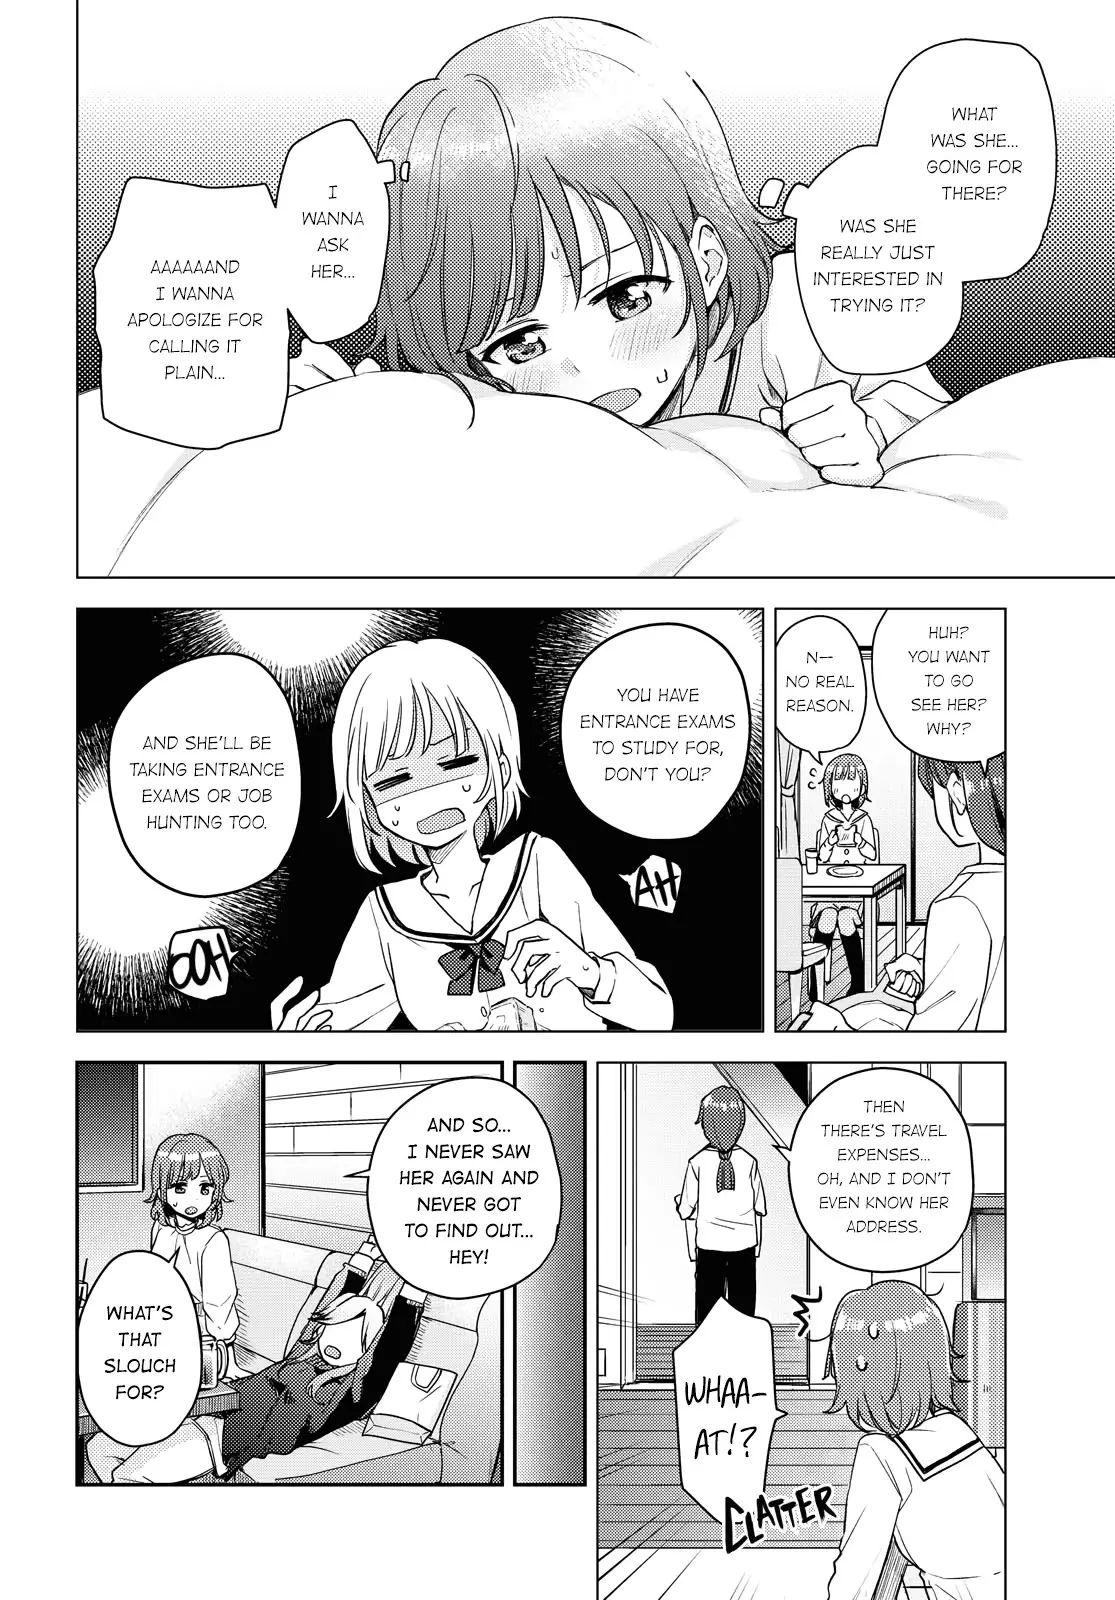 Asumi-Chan Is Interested In Lesbian Brothels! - 1 page 10